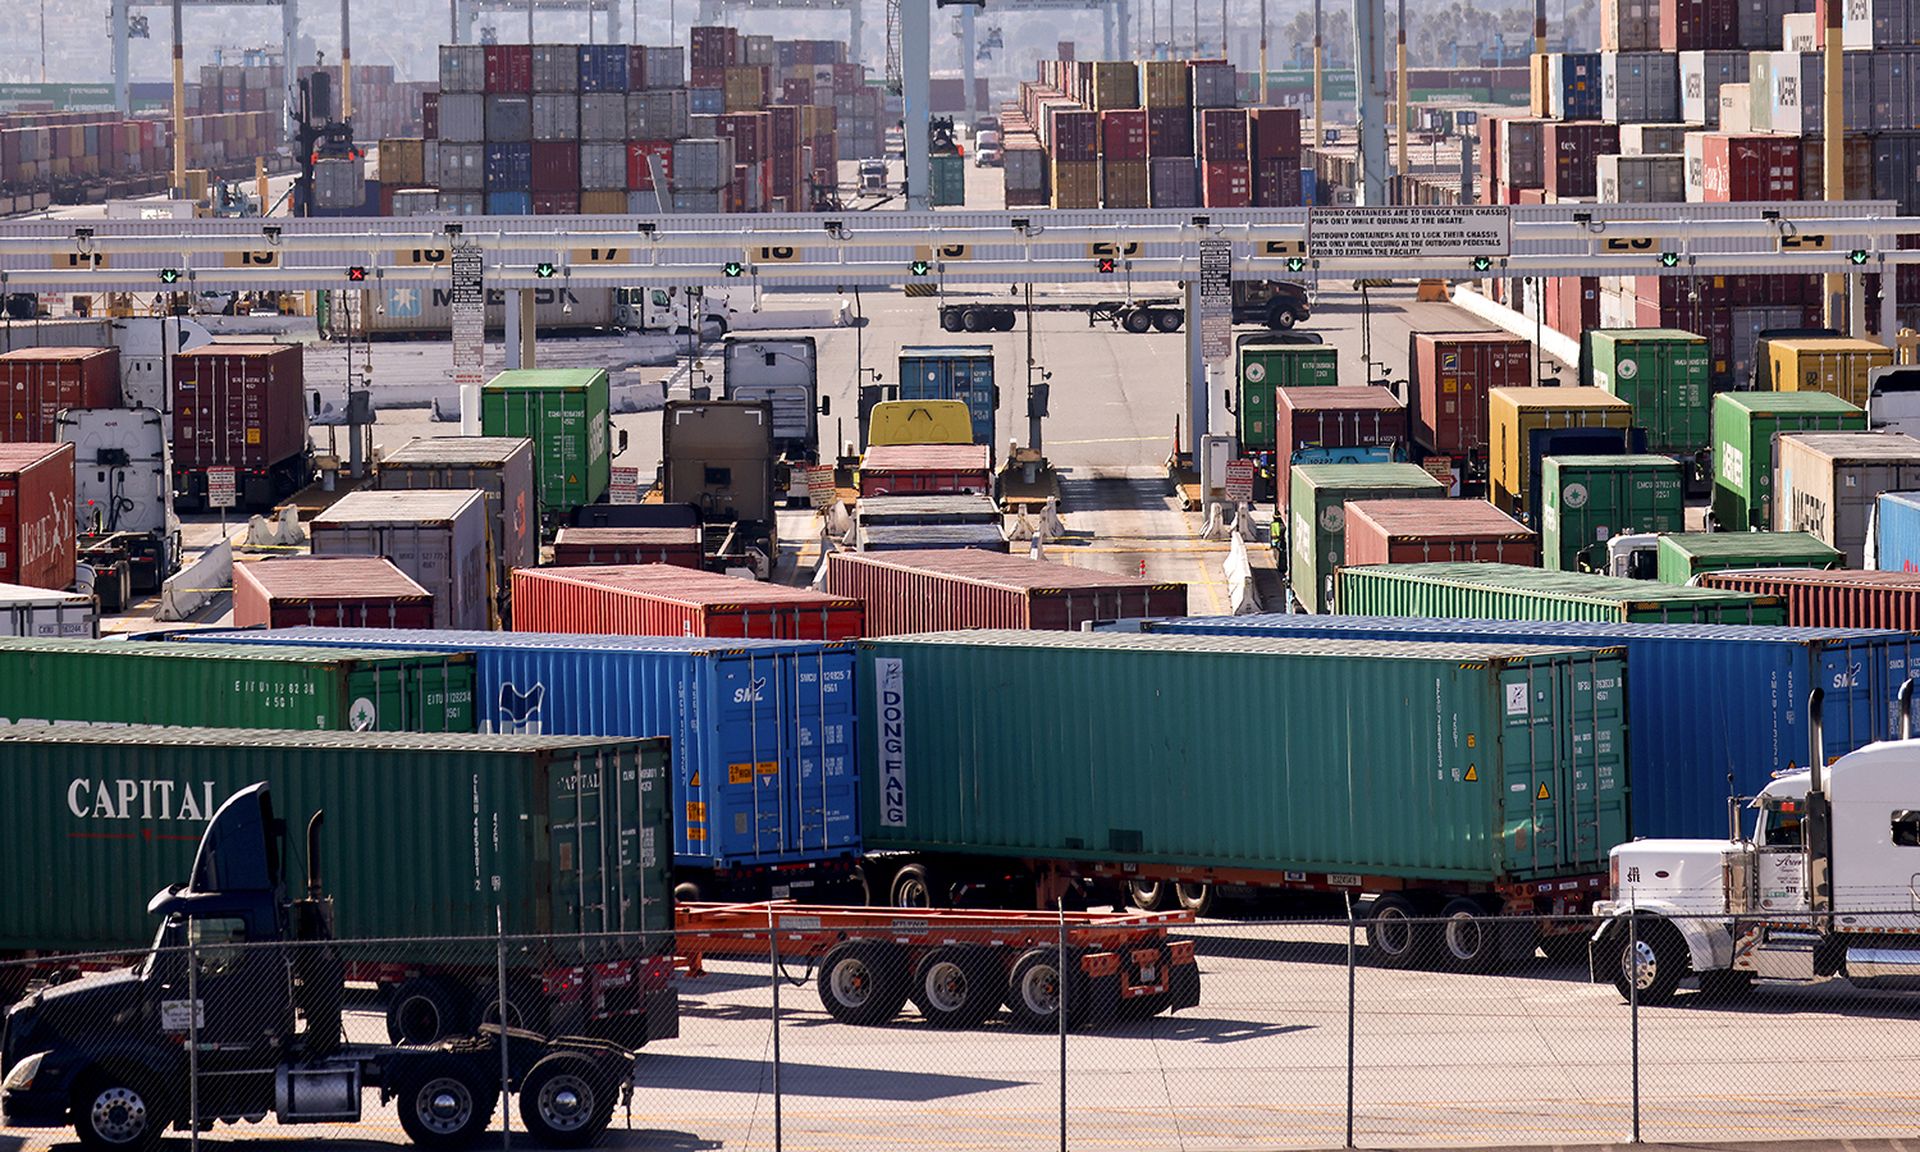 Products such as ATMS, card readers and financial software is susceptible to supply chain threats, said one expert Pictured: Trucks haul shipping containers at the Port of Los Angeles on Nov. 24, 2021, in San Pedro, Calif. (Photo by Mario Tama/Getty Images)